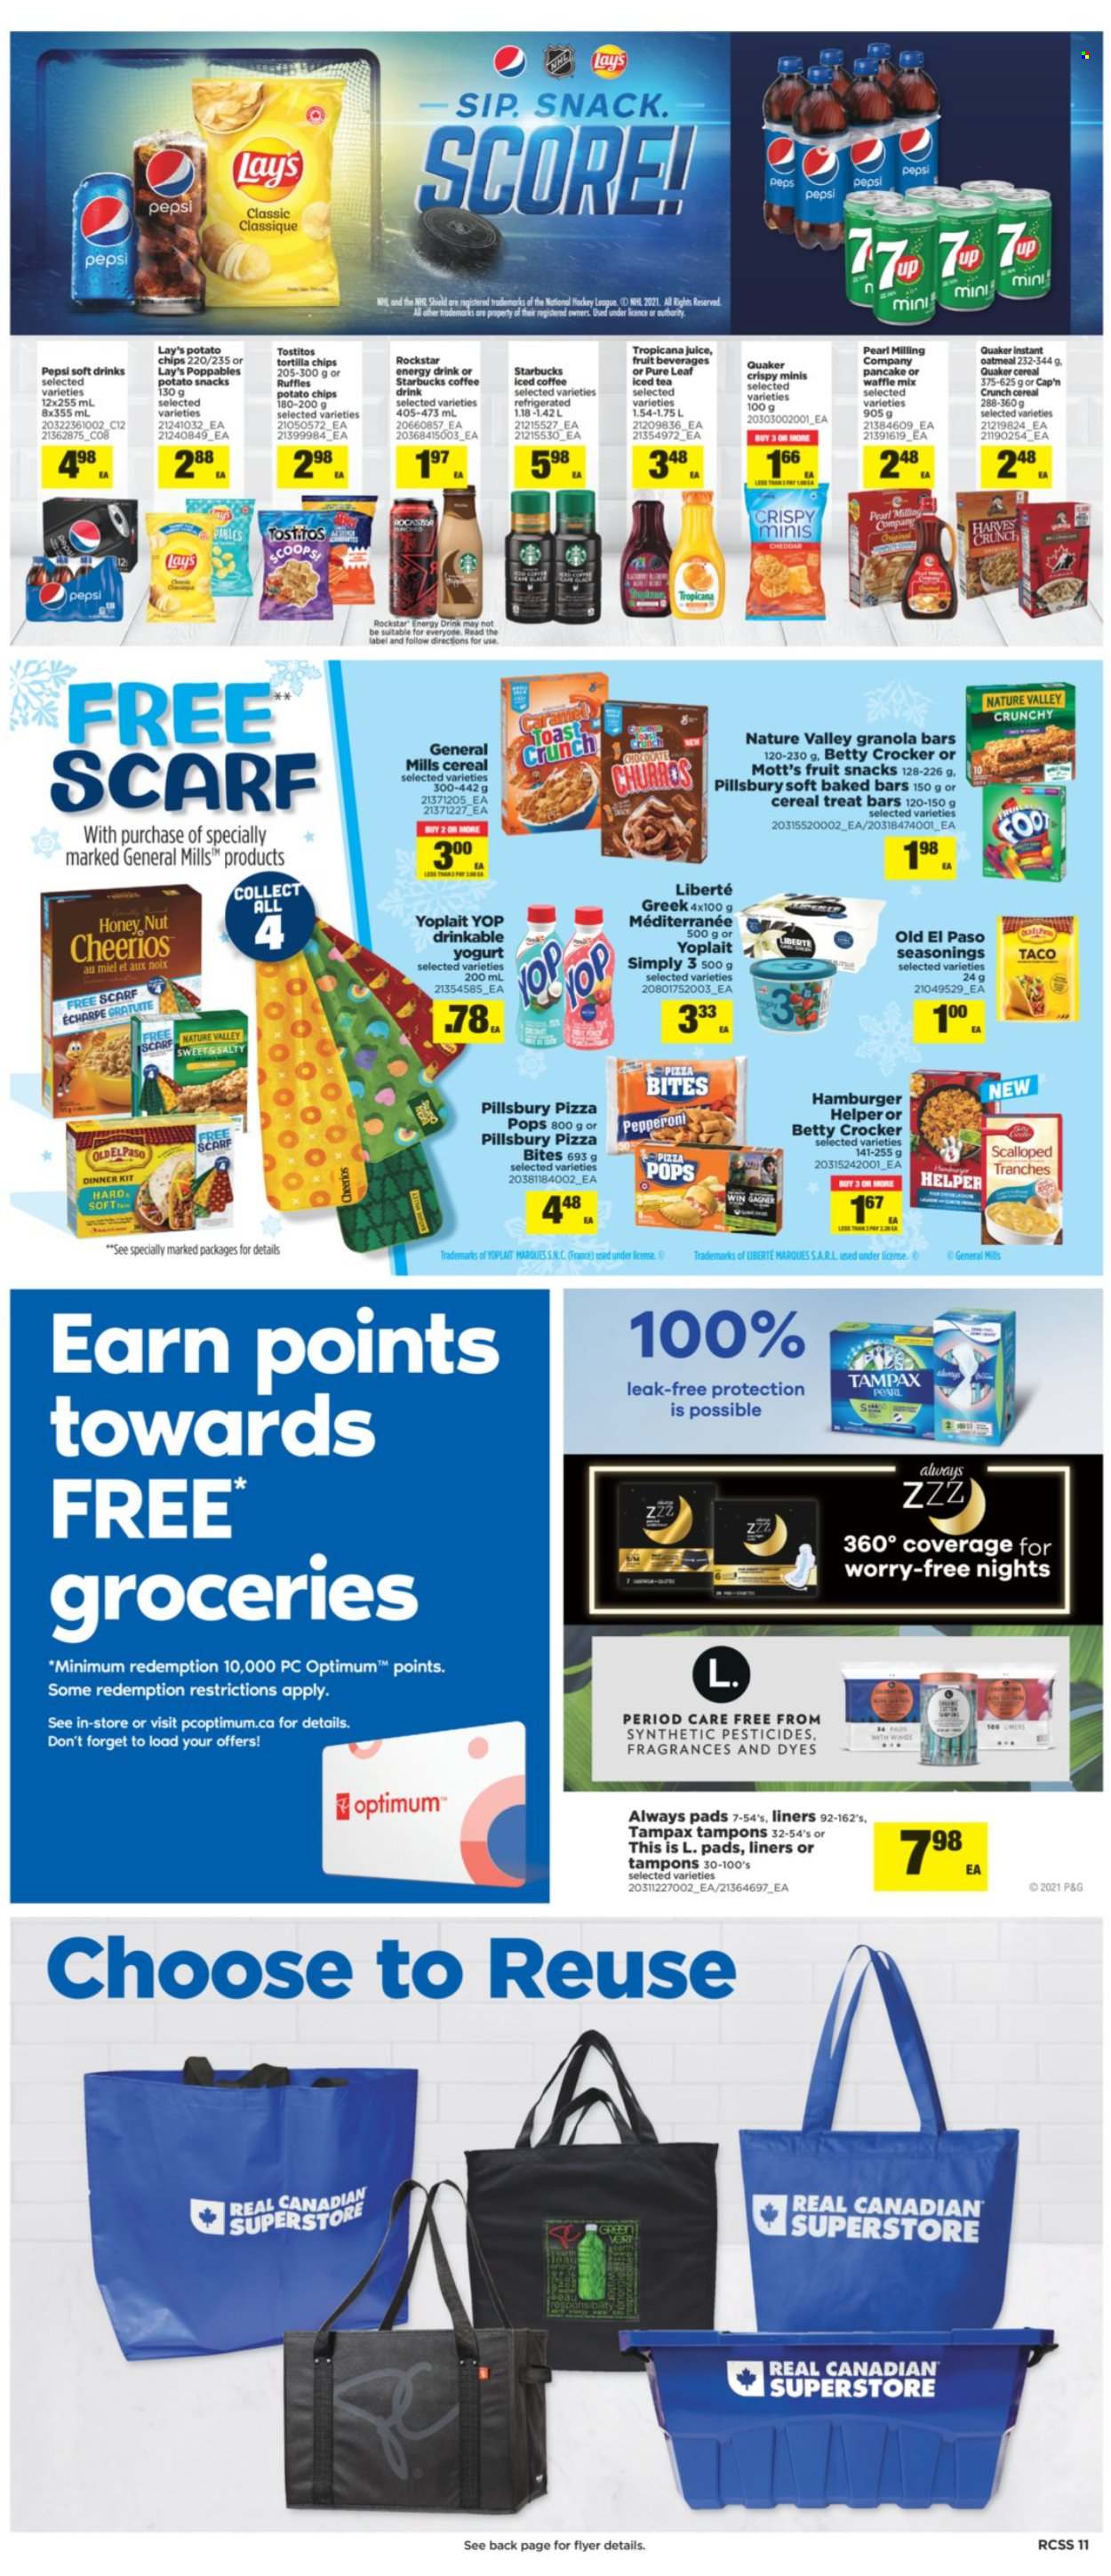 thumbnail - Real Canadian Superstore Flyer - October 14, 2021 - October 20, 2021 - Sales products - Old El Paso, Mott's, pizza, pancakes, Pillsbury, dinner kit, Quaker, pepperoni, yoghurt, Yoplait, chocolate, fruit snack, tortilla chips, potato chips, Lay’s, Ruffles, Tostitos, oatmeal, Cheerios, granola bar, churros, Cap'n Crunch, Nature Valley, Pepsi, juice, energy drink, ice tea, soft drink, Rockstar, iced coffee, Pure Leaf, Starbucks, Always pads, tampons, Optimum, Tampax, chips. Page 11.